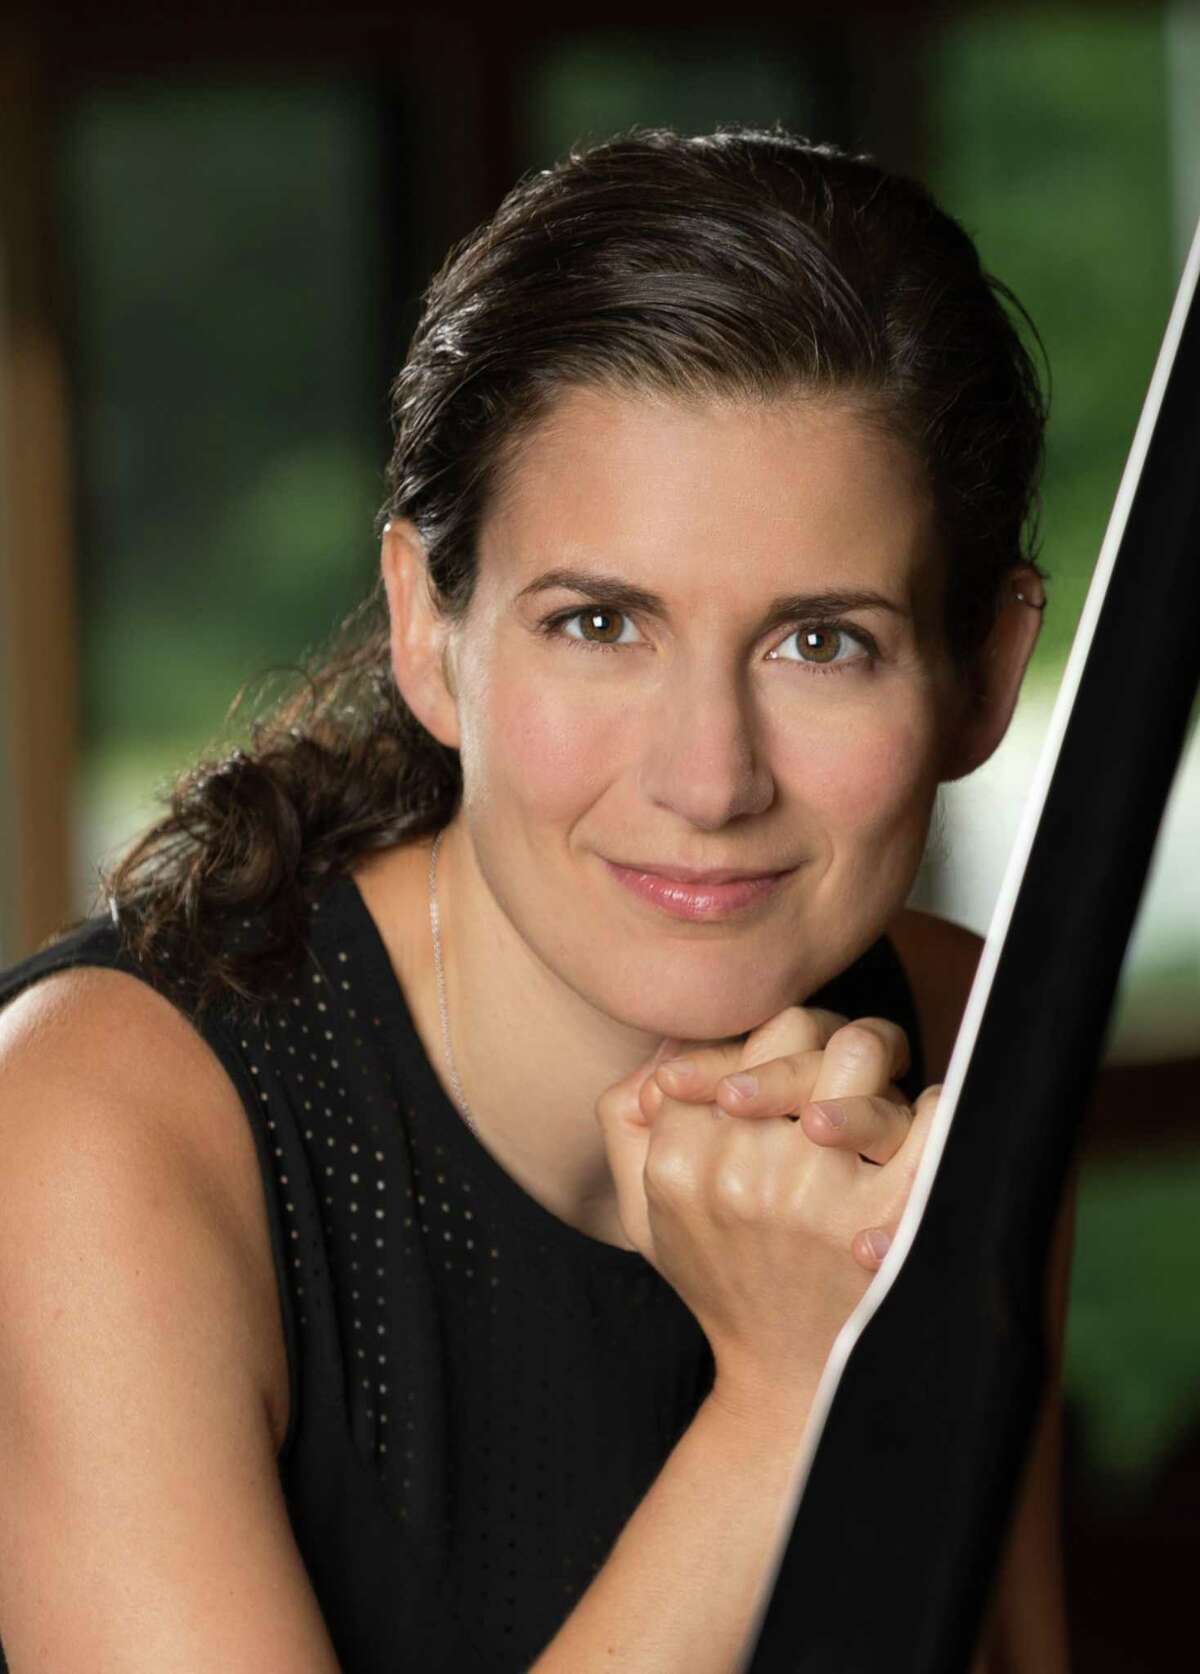 Pianist Anna Polonsky will perform with violinst Kobi Malkin at the Southport Congregational Church in Fairfield on June 2, in a Music for Youth benefit concert.